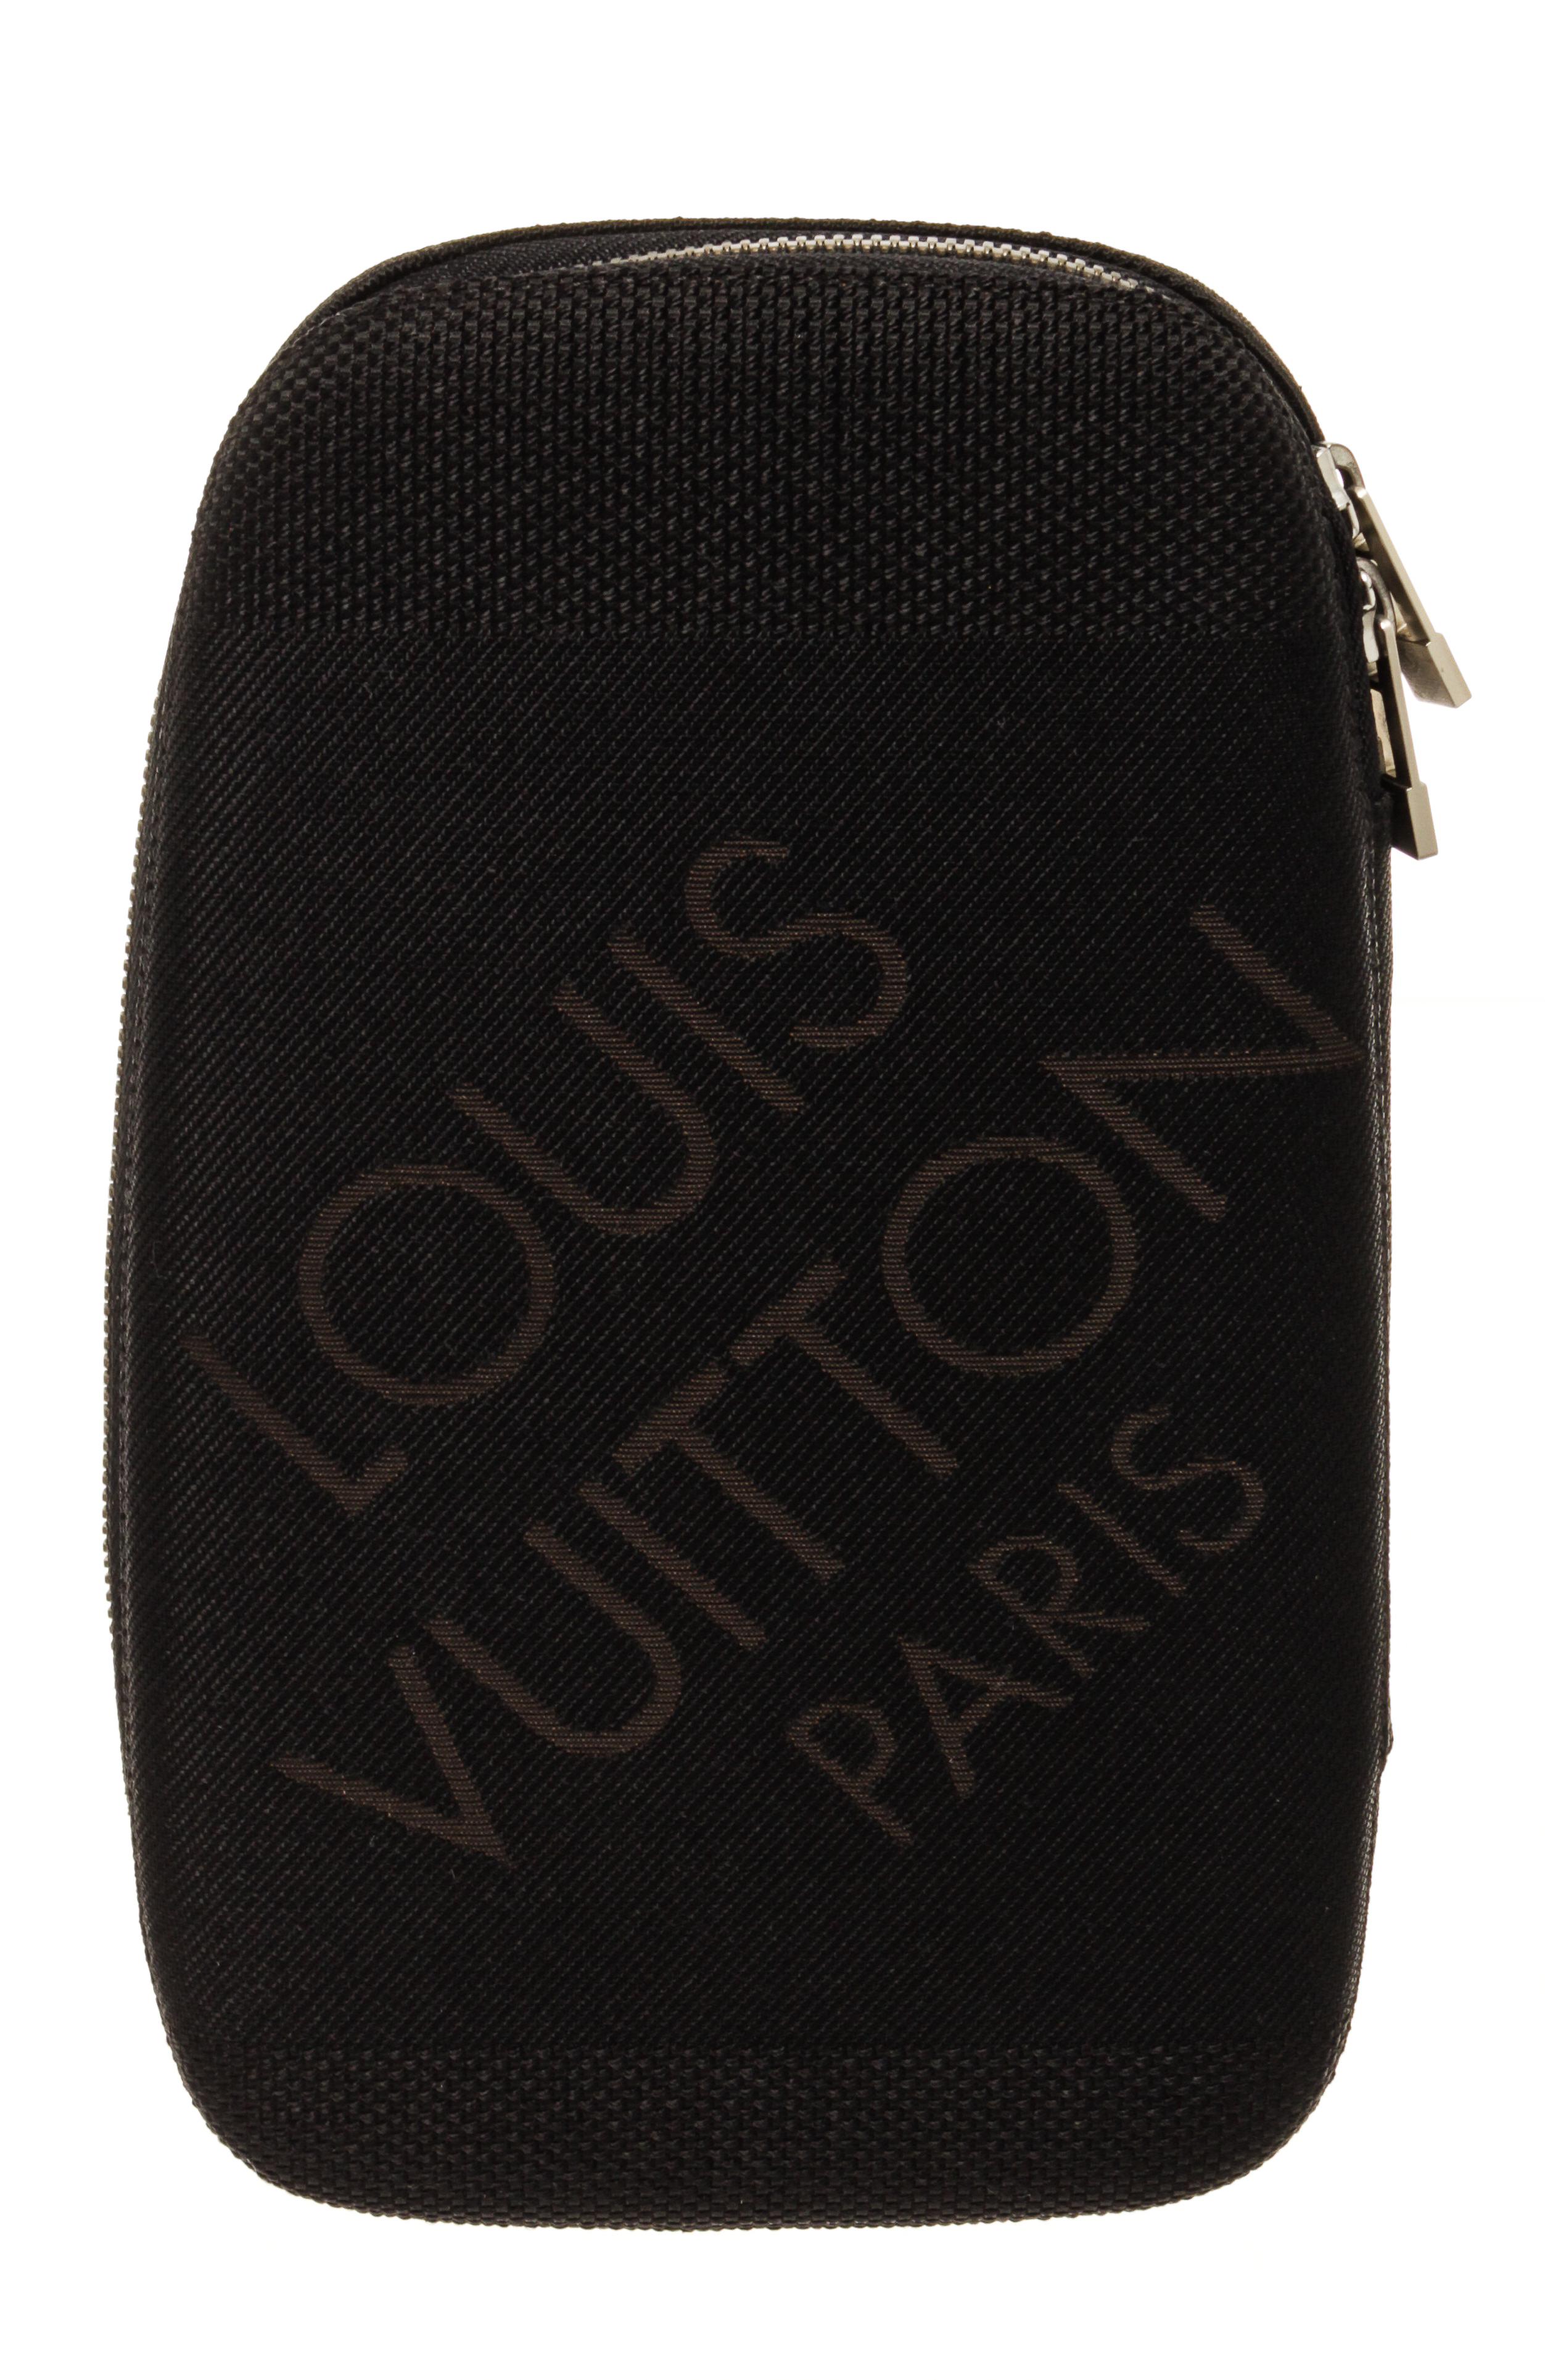 Louis Vuitton Damier Geant Mage Waist Shoulder Bag with silver-tone hardware, adjustable woven shoulder strap, brown taiga leather interior, dual card slots, single mesh compartment, money clip holder, zip mesh pocket and zip closure at parameters. 